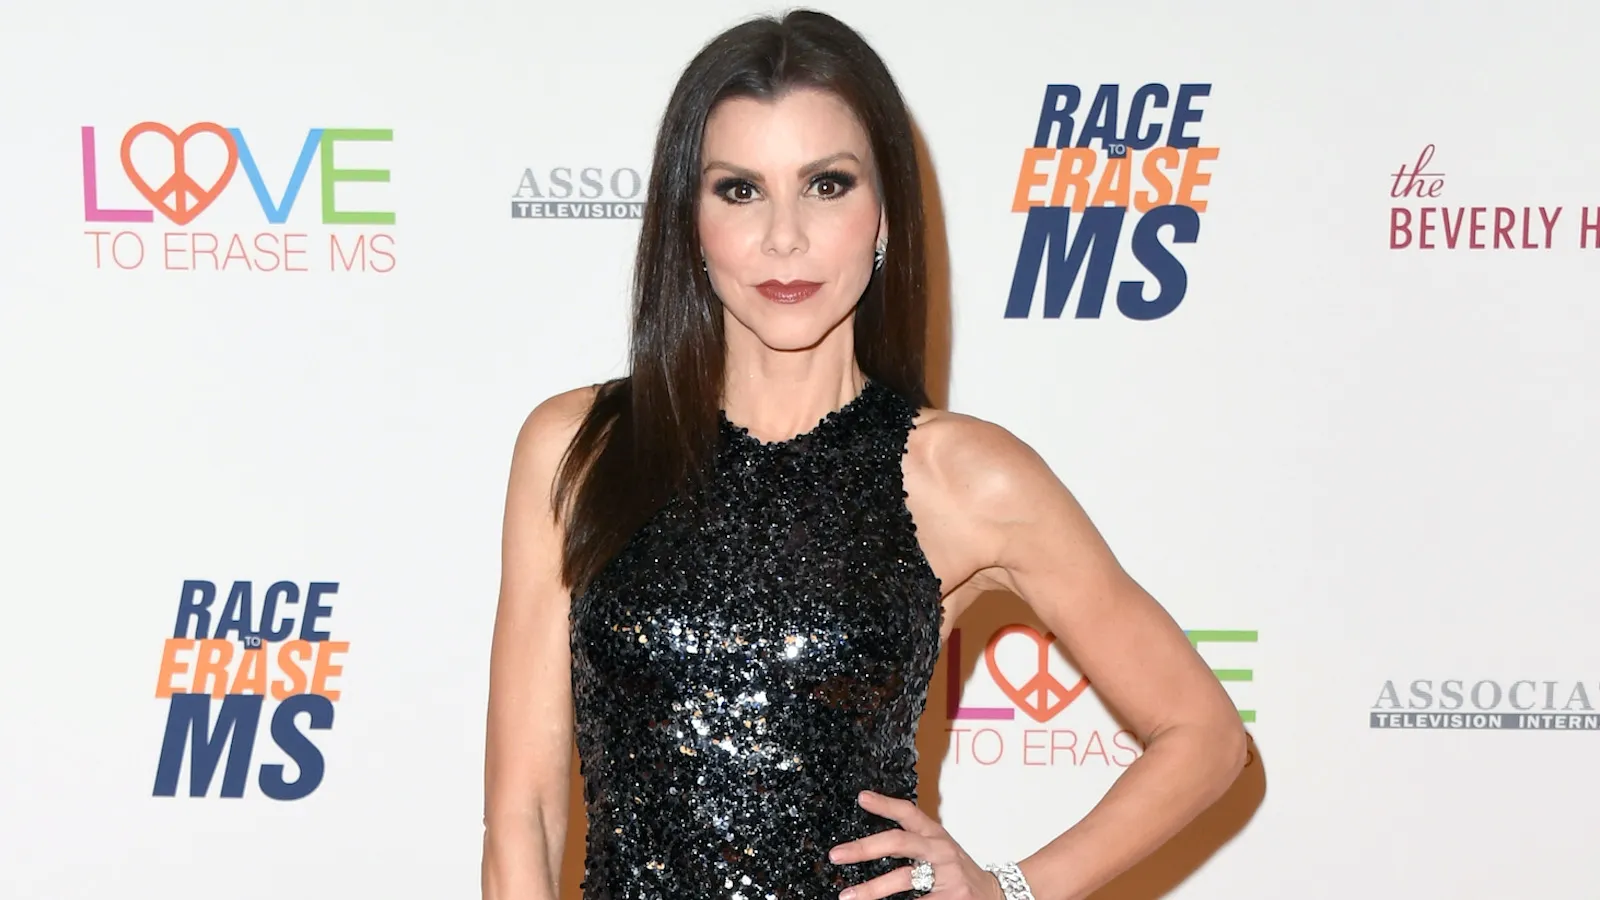 Heather Dubrow - The Real Housewives of Orange County